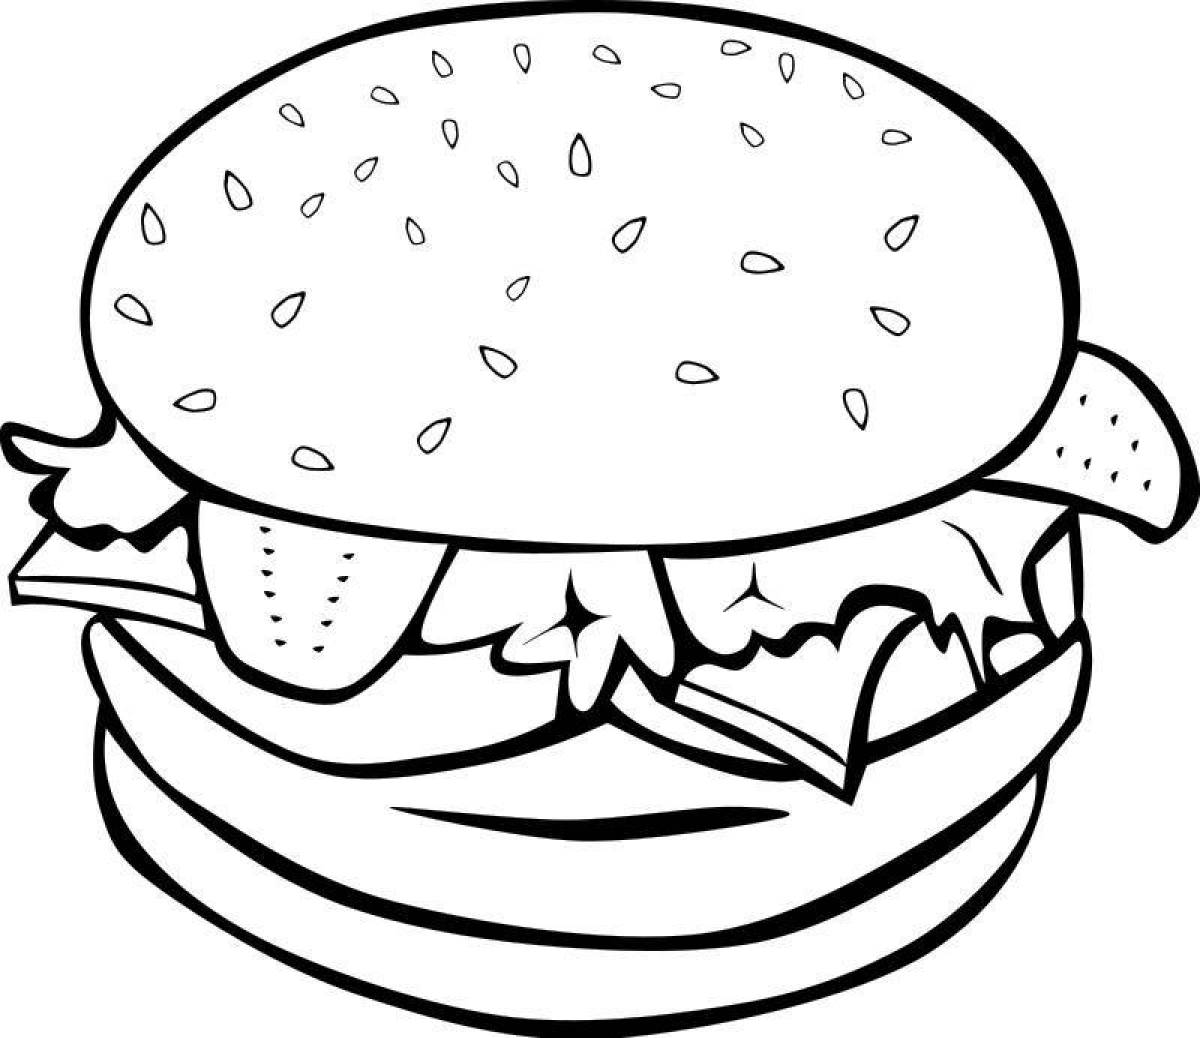 Gourmet burger and fries coloring page